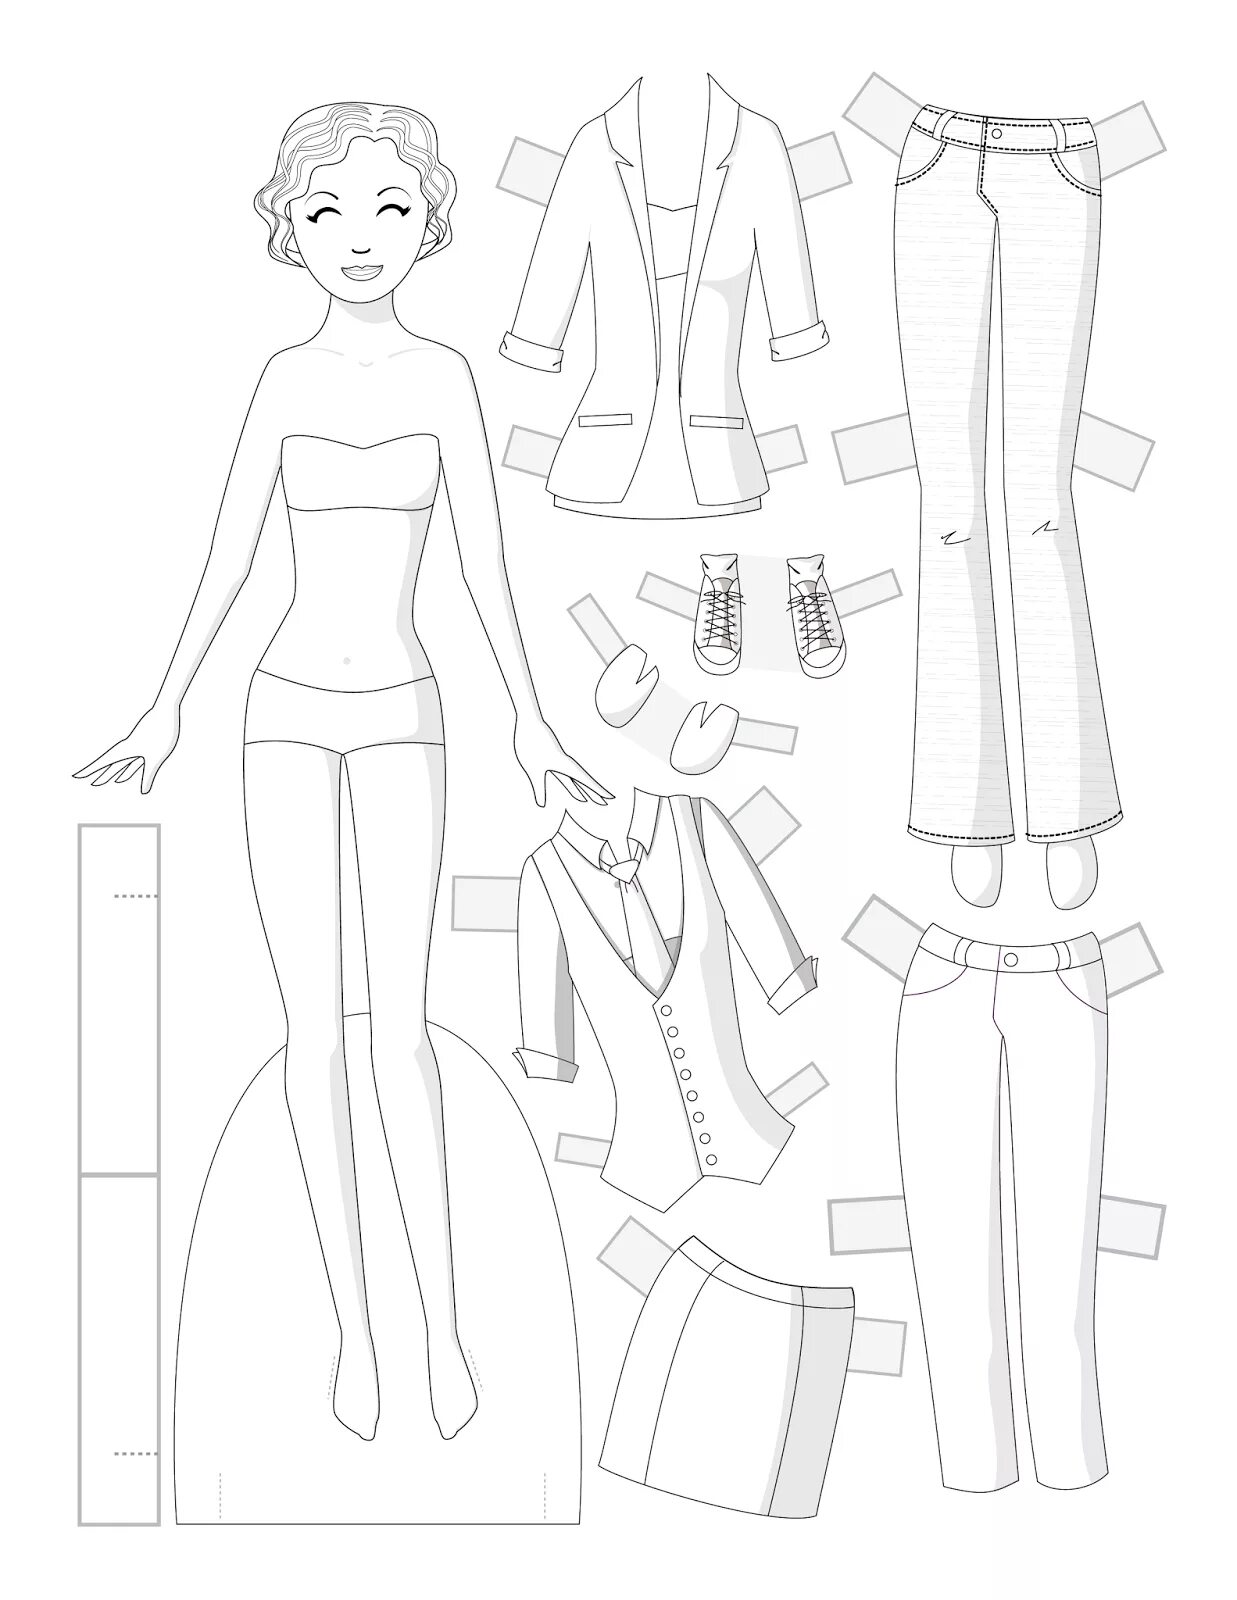 Fun coloring paper barbie doll with clothes to cut out